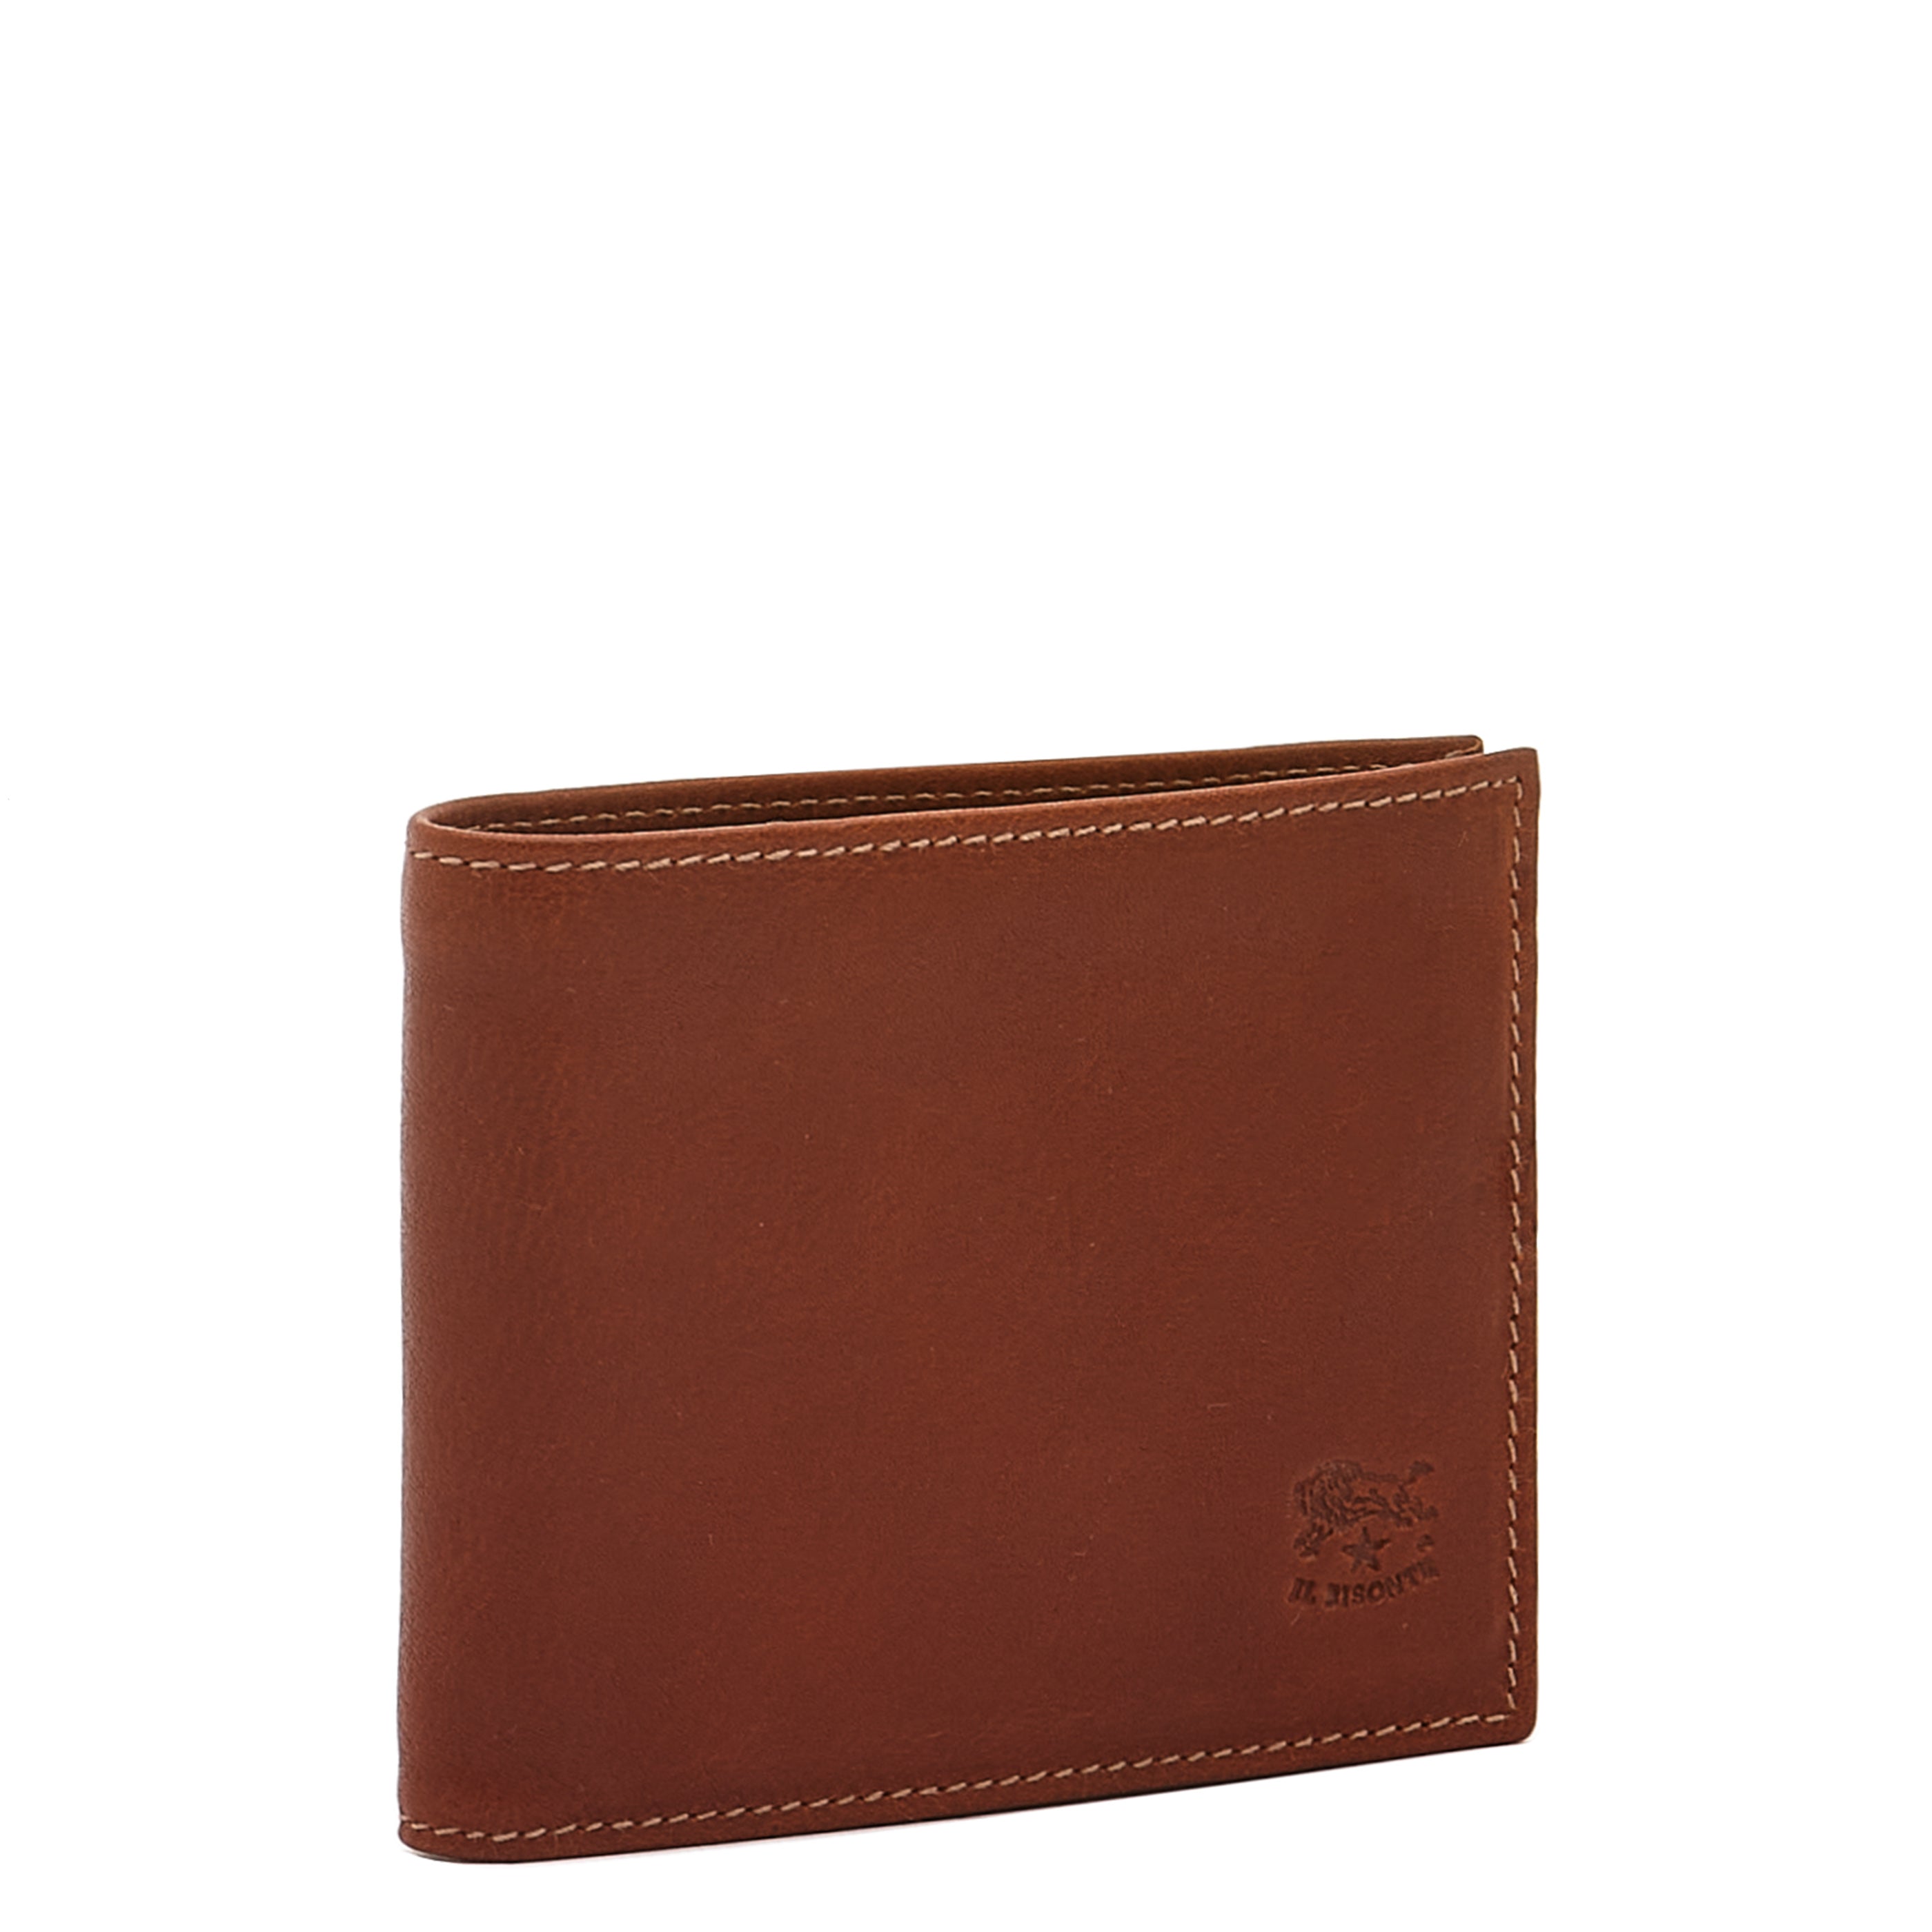 Buy Woodland Woodland Men Textured Detail Leather Money Clip at Redfynd